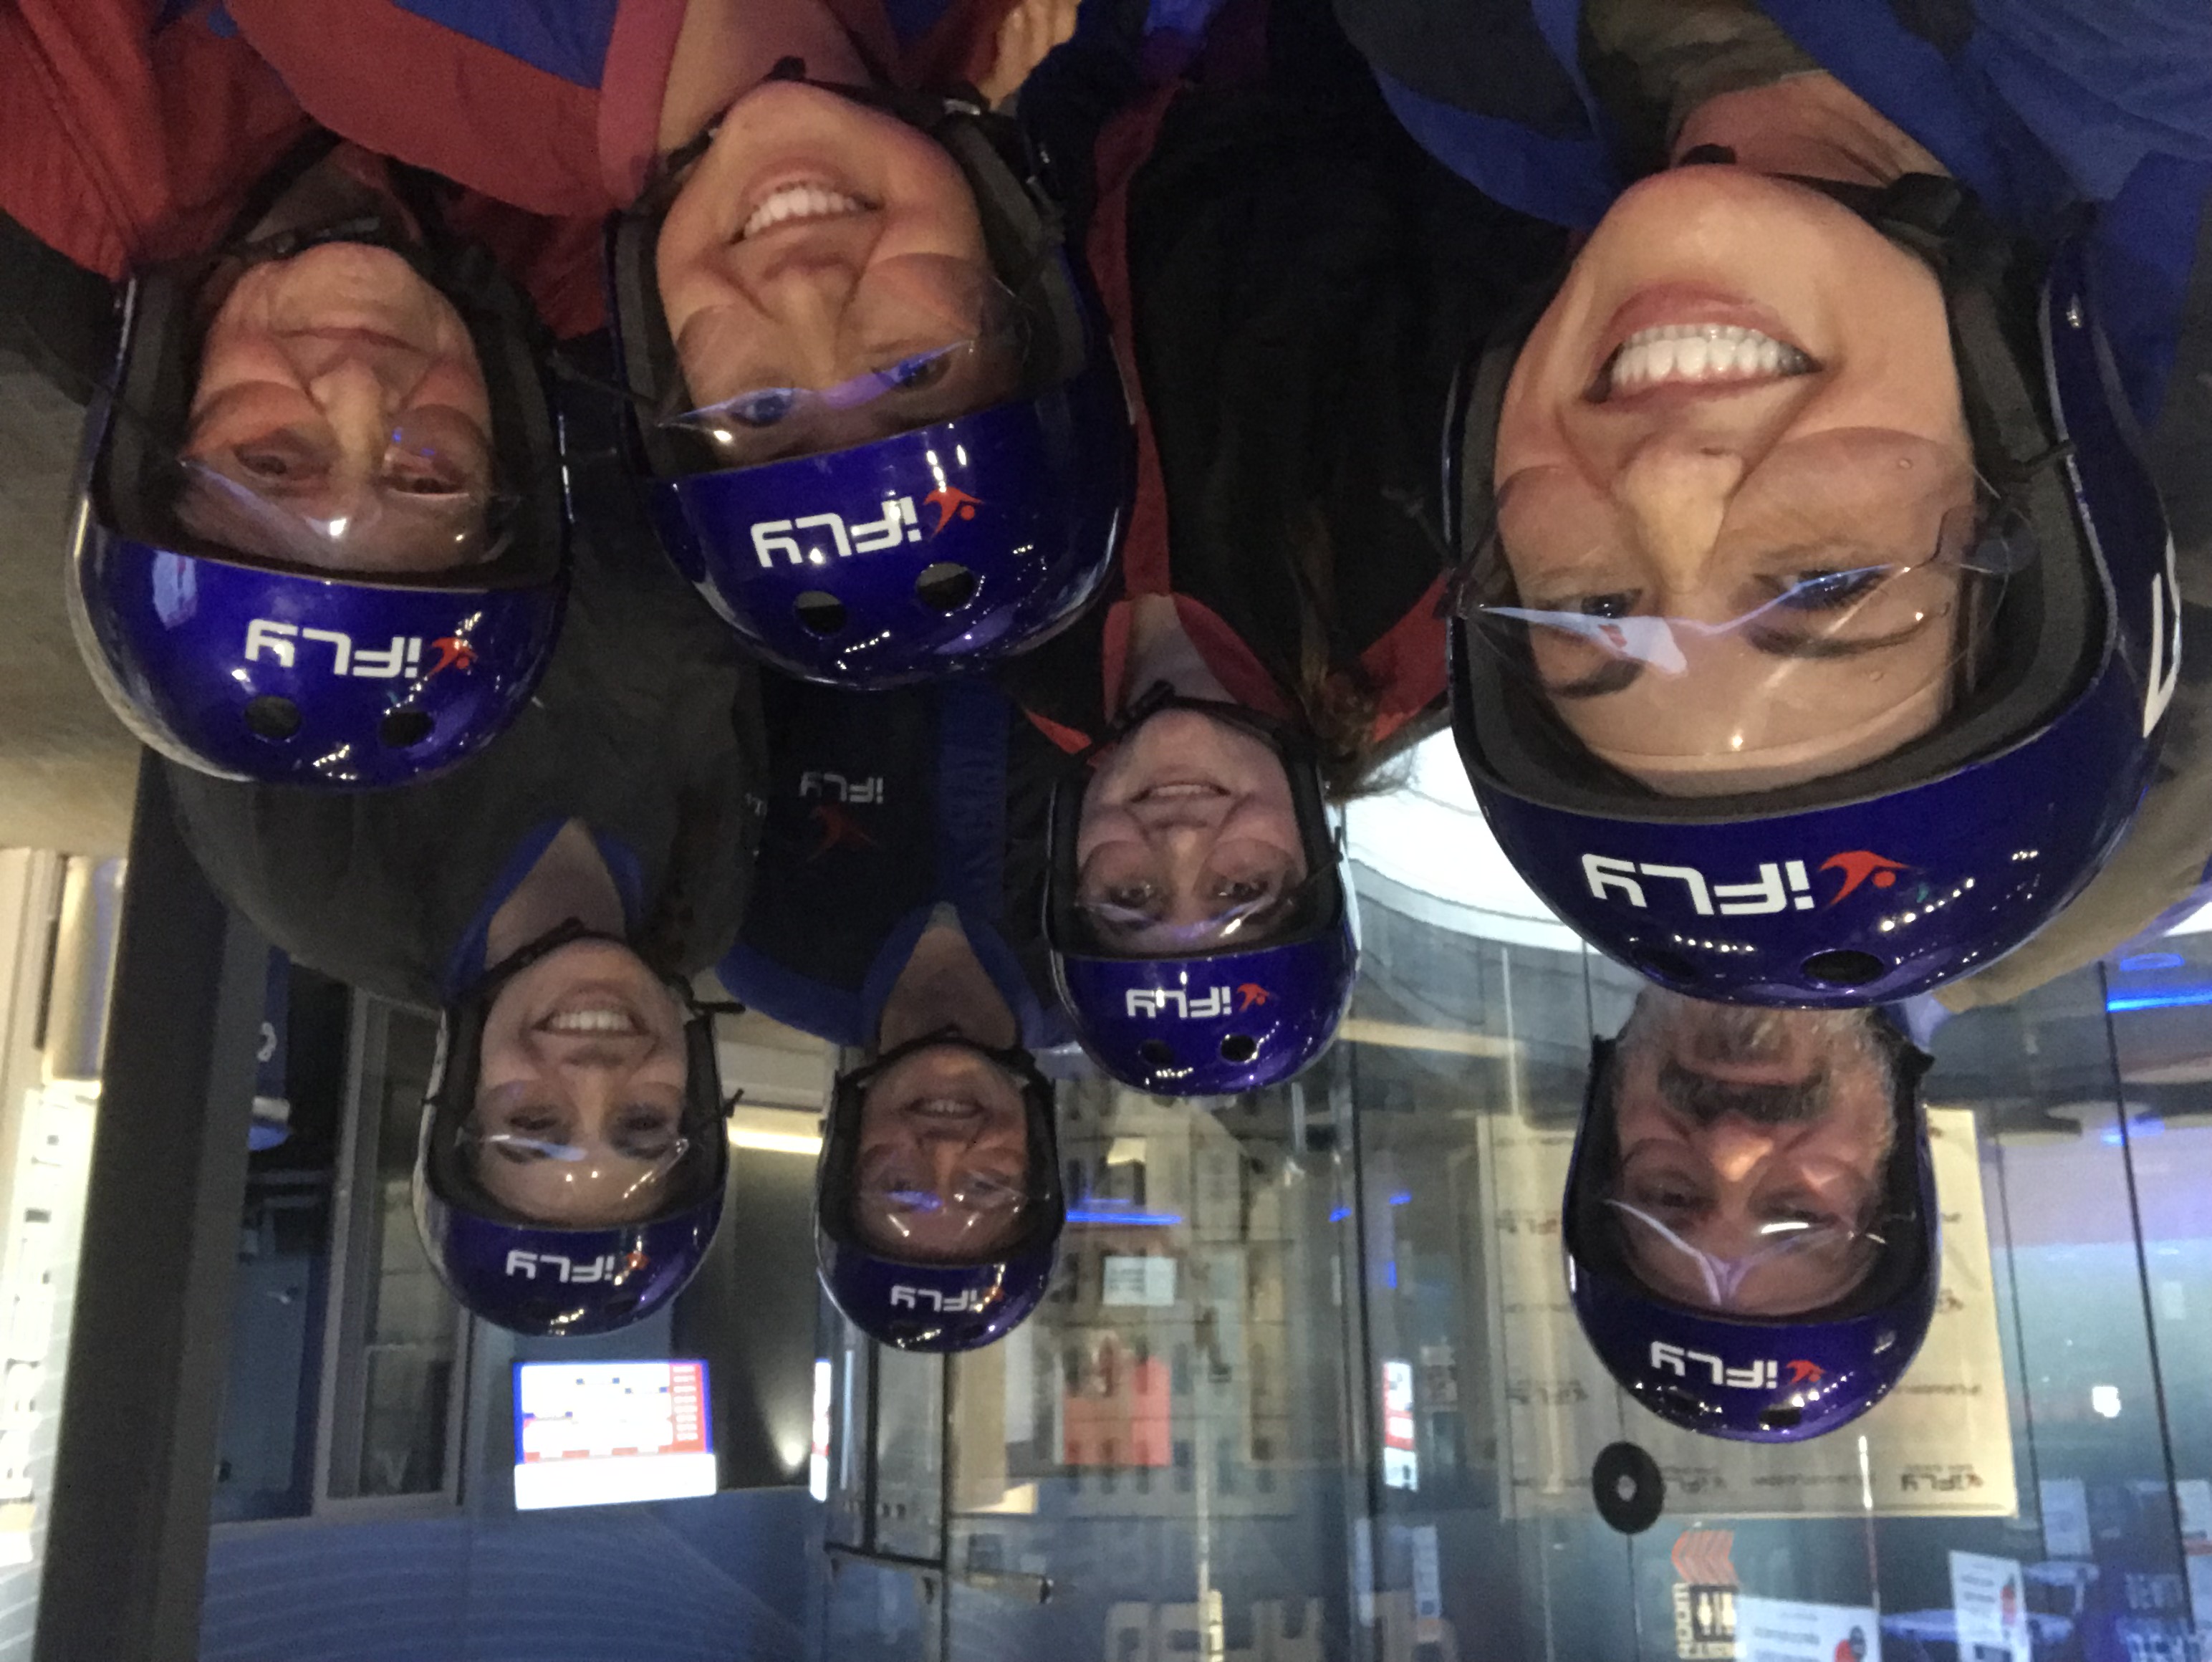 Group at iFly